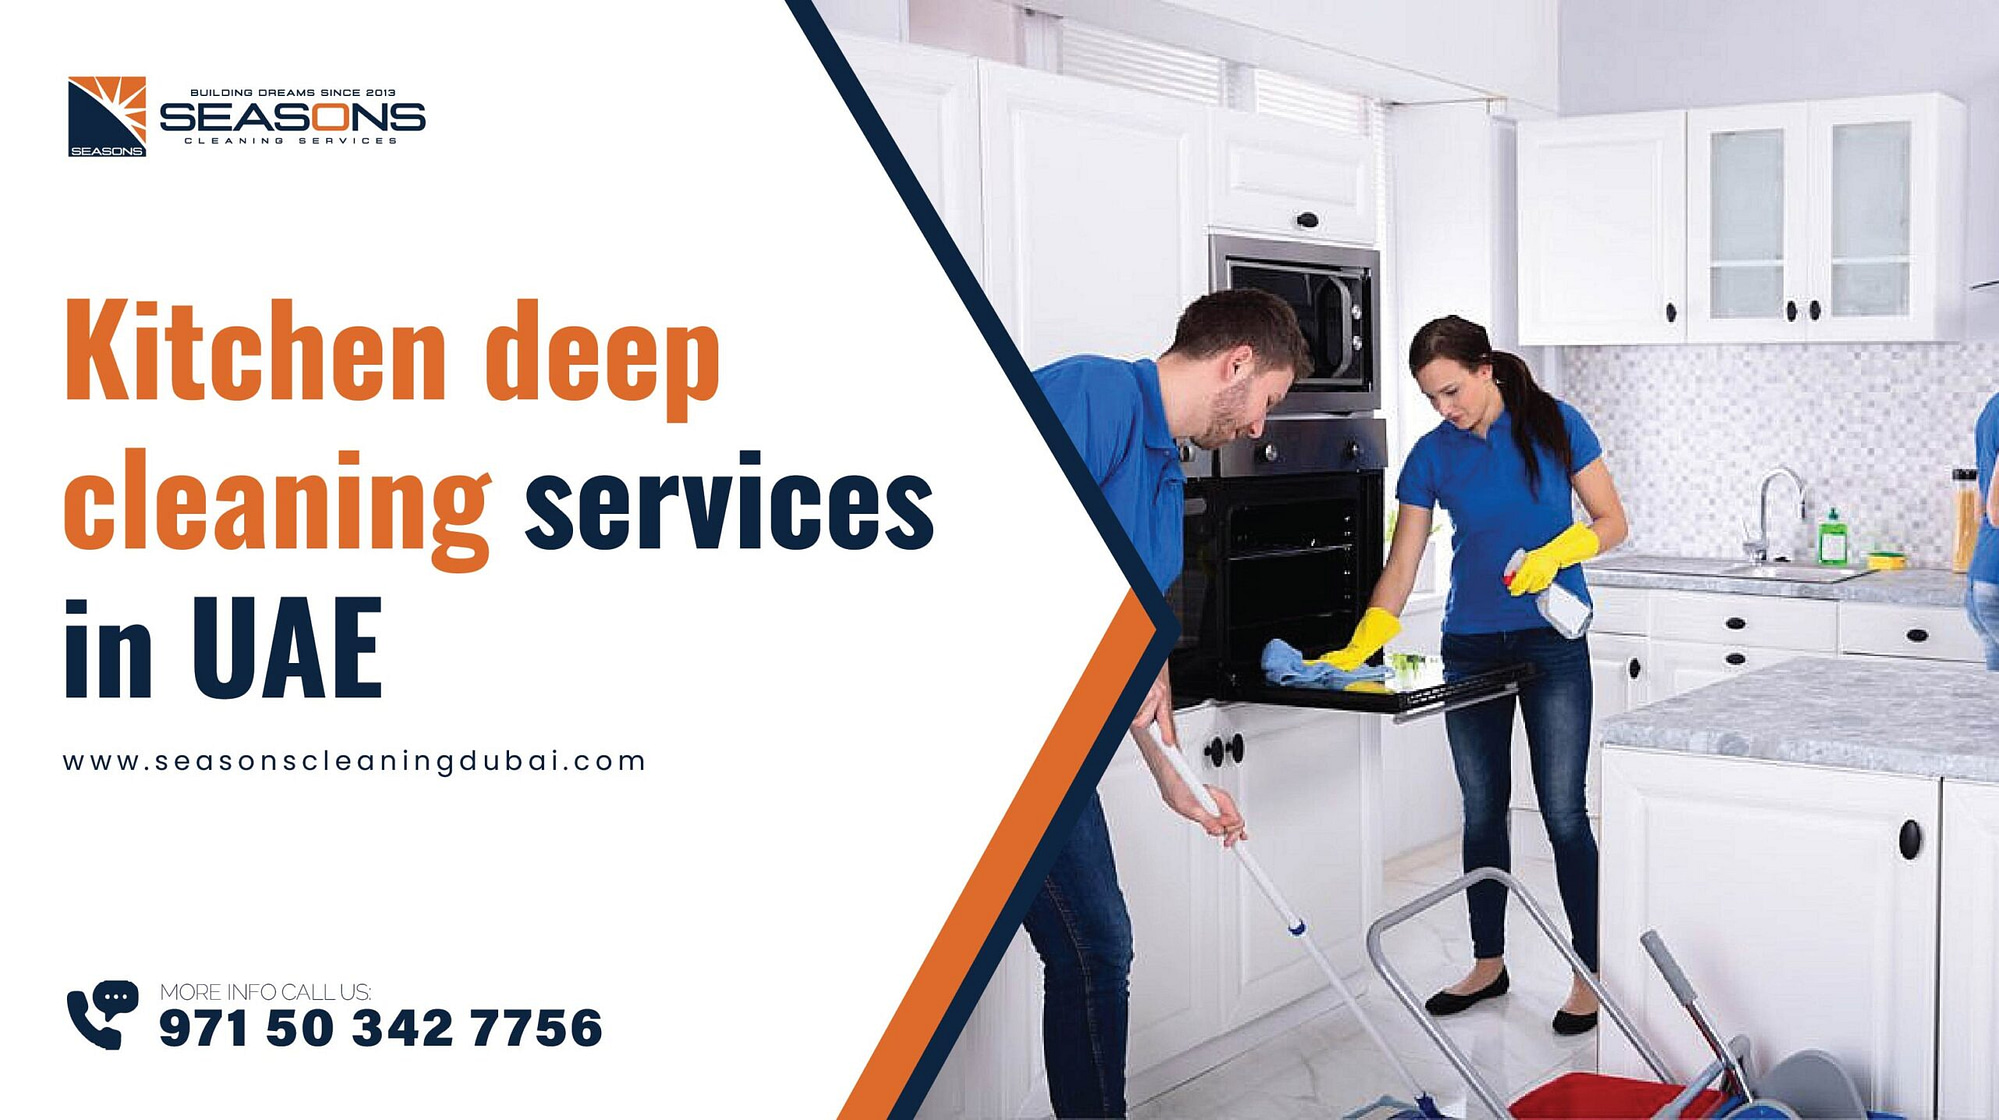 Kitchen deep cleaning services in UAE